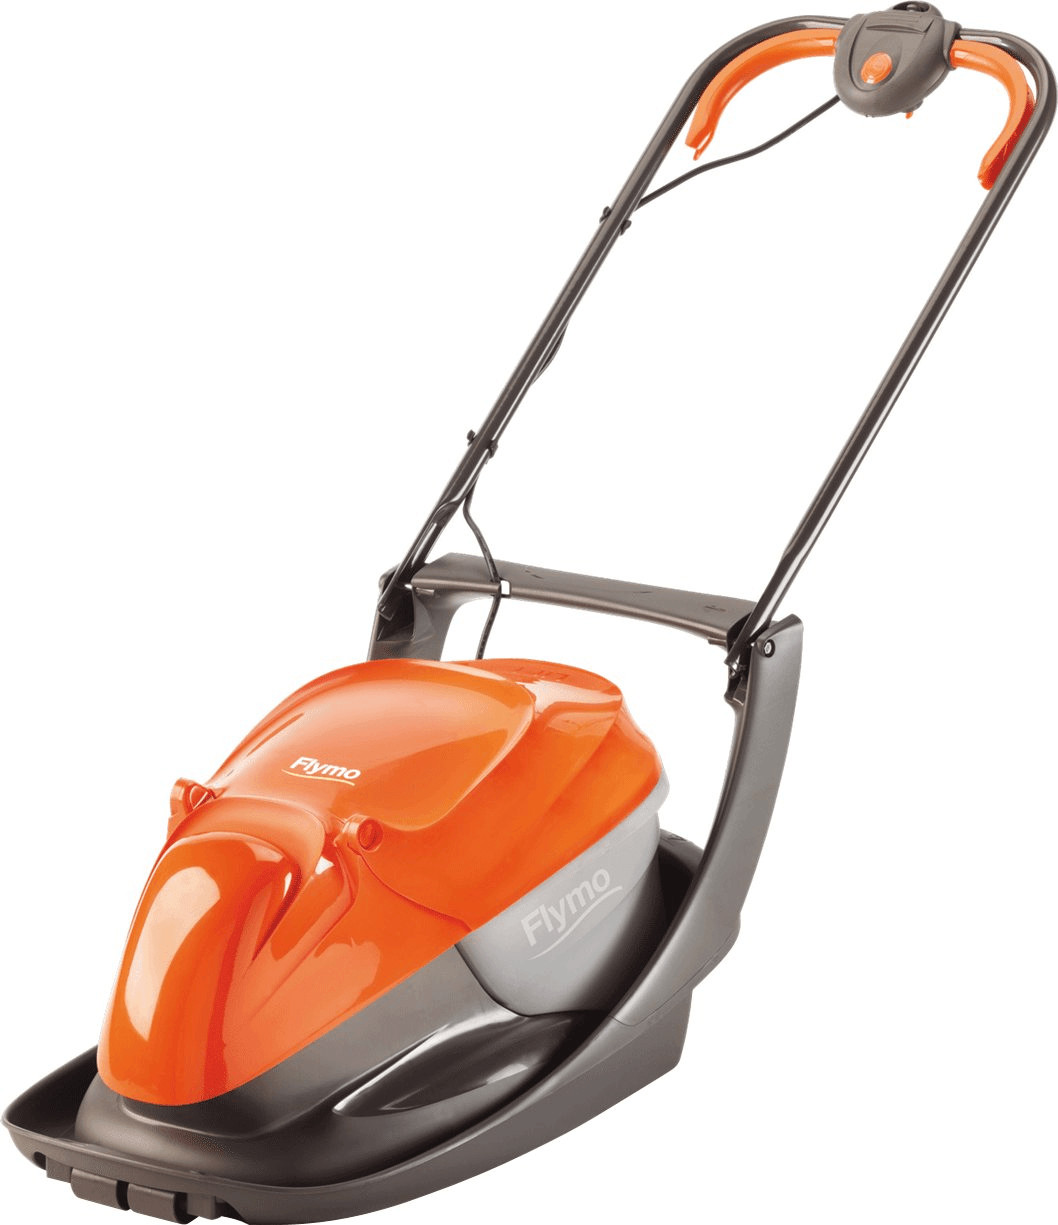 Flymo Easi Glide 300 Hover Lawn Mower